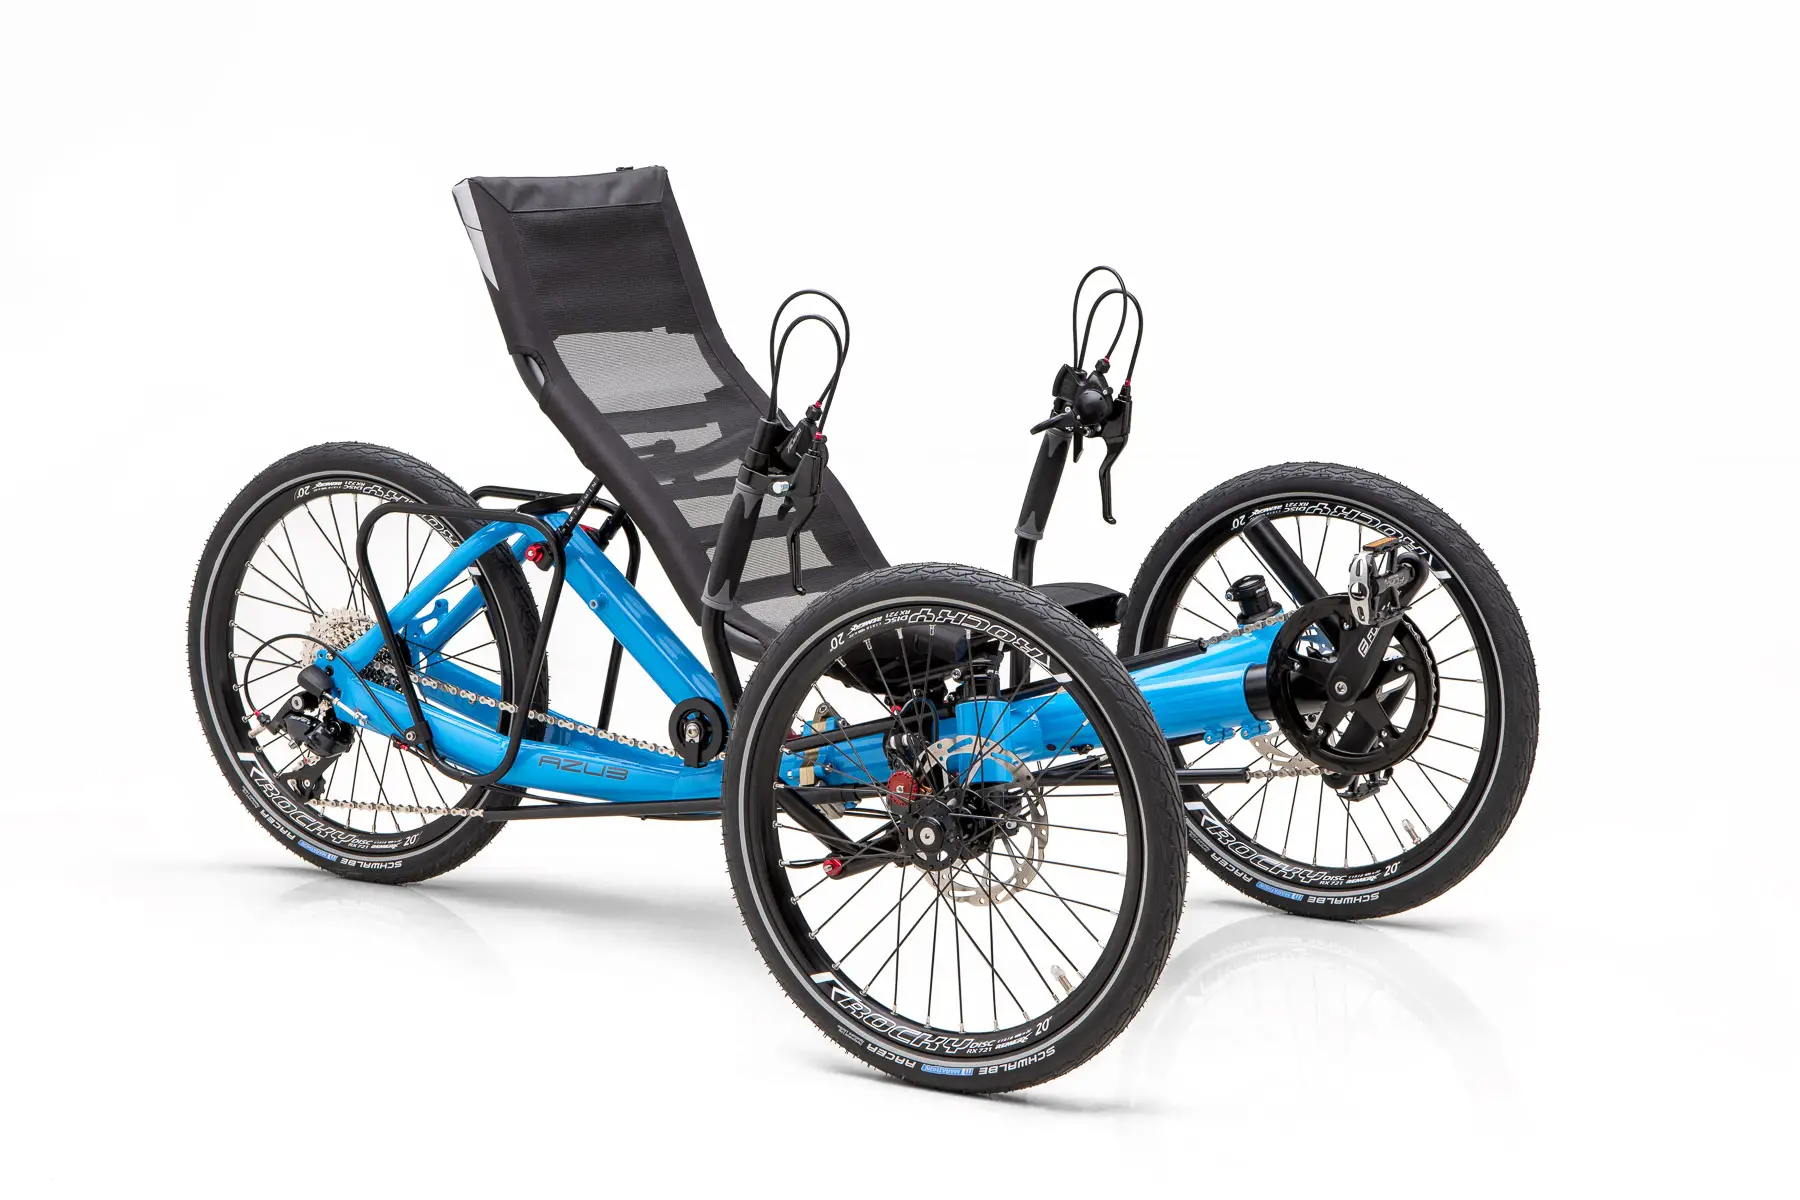 AZUB T-Trisek - a tricycle for short riders